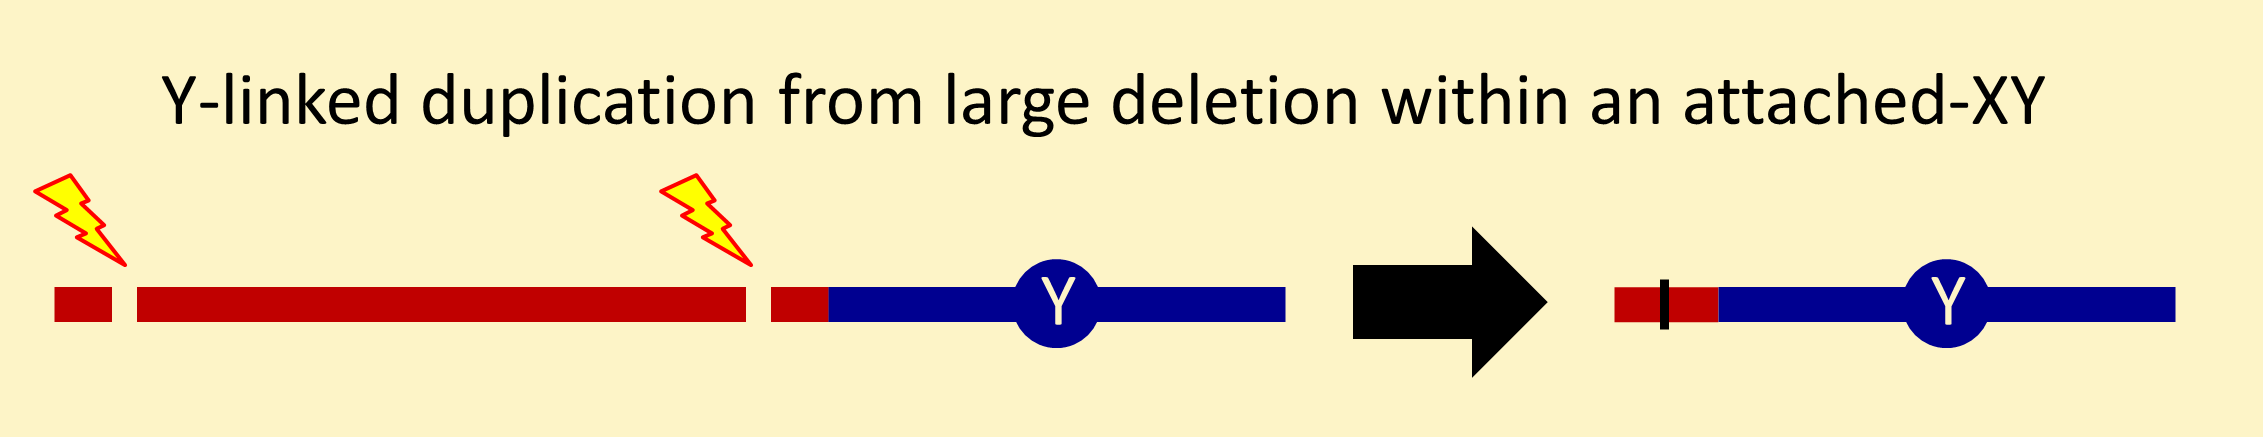 y-linked duplication from deletion within an attached-XY chromosone